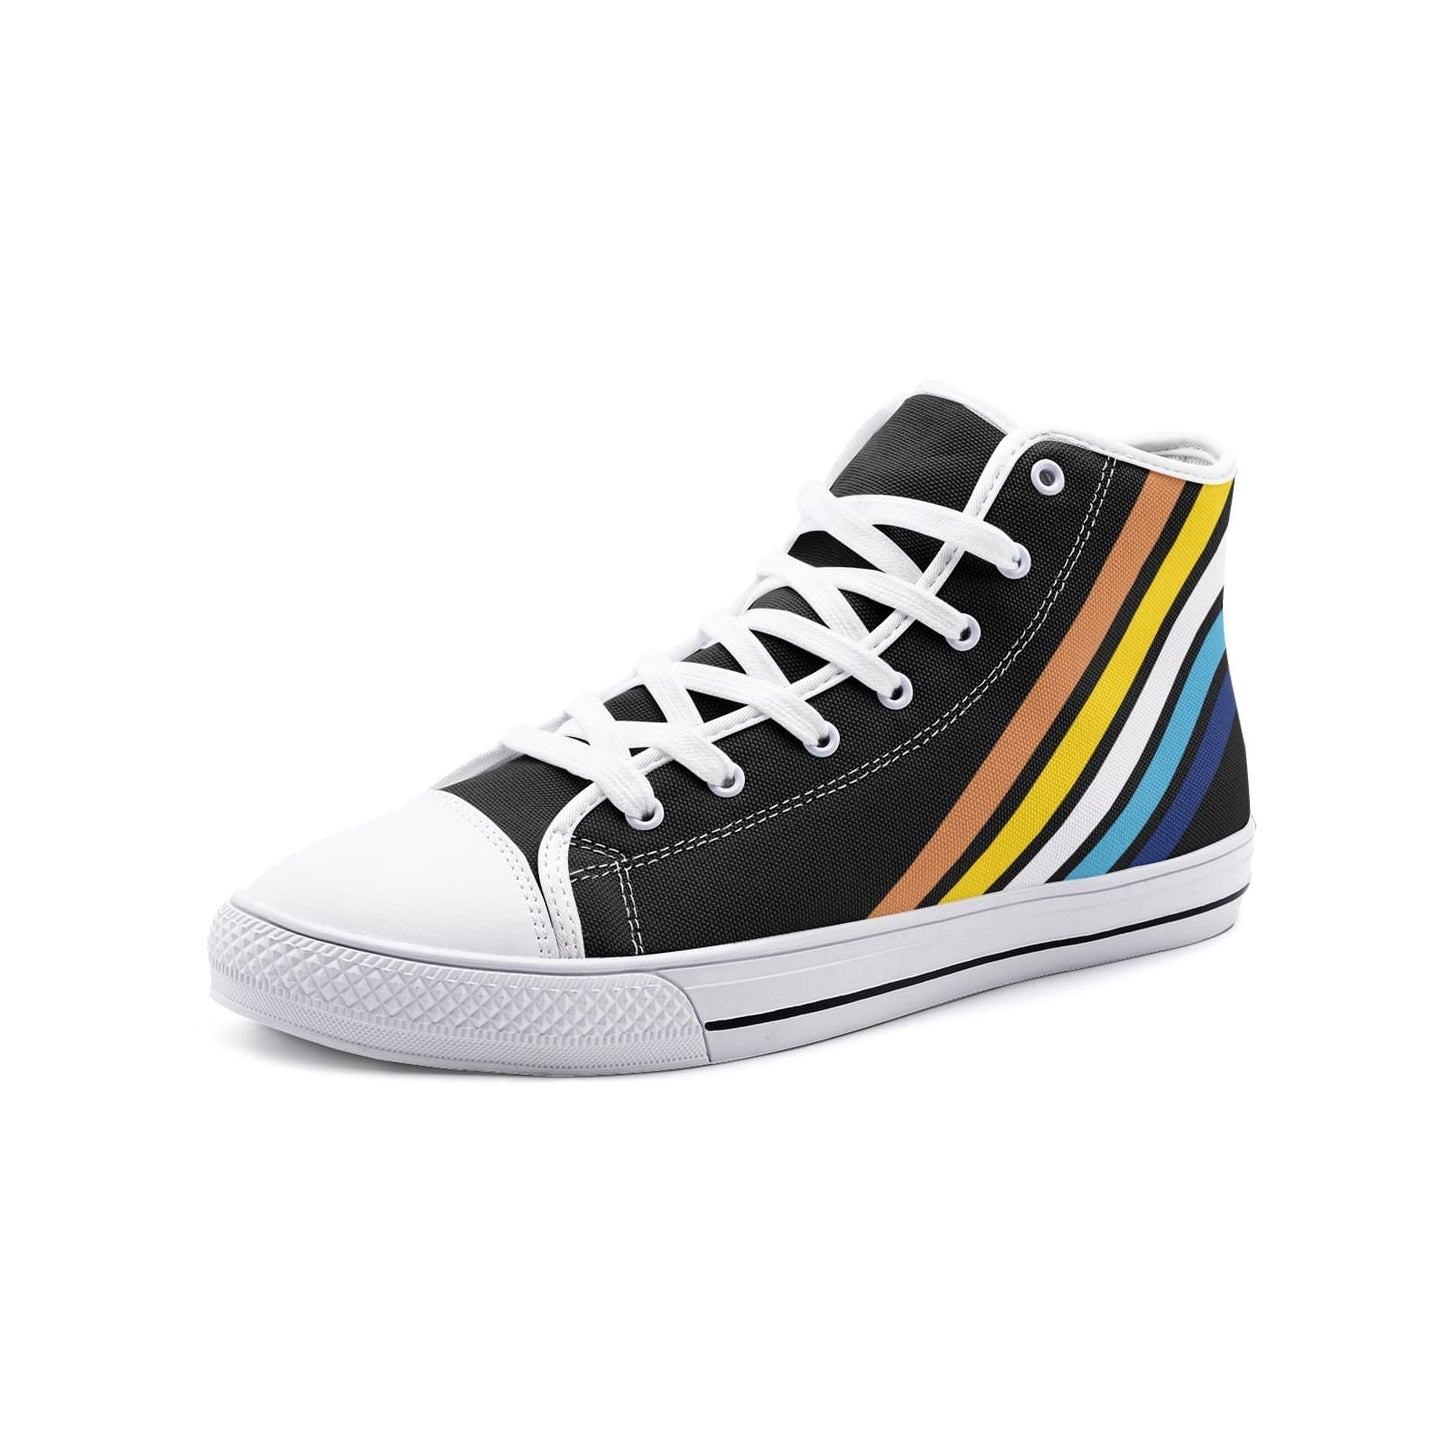 aroace shoes, subtle aro ace sneakers, white